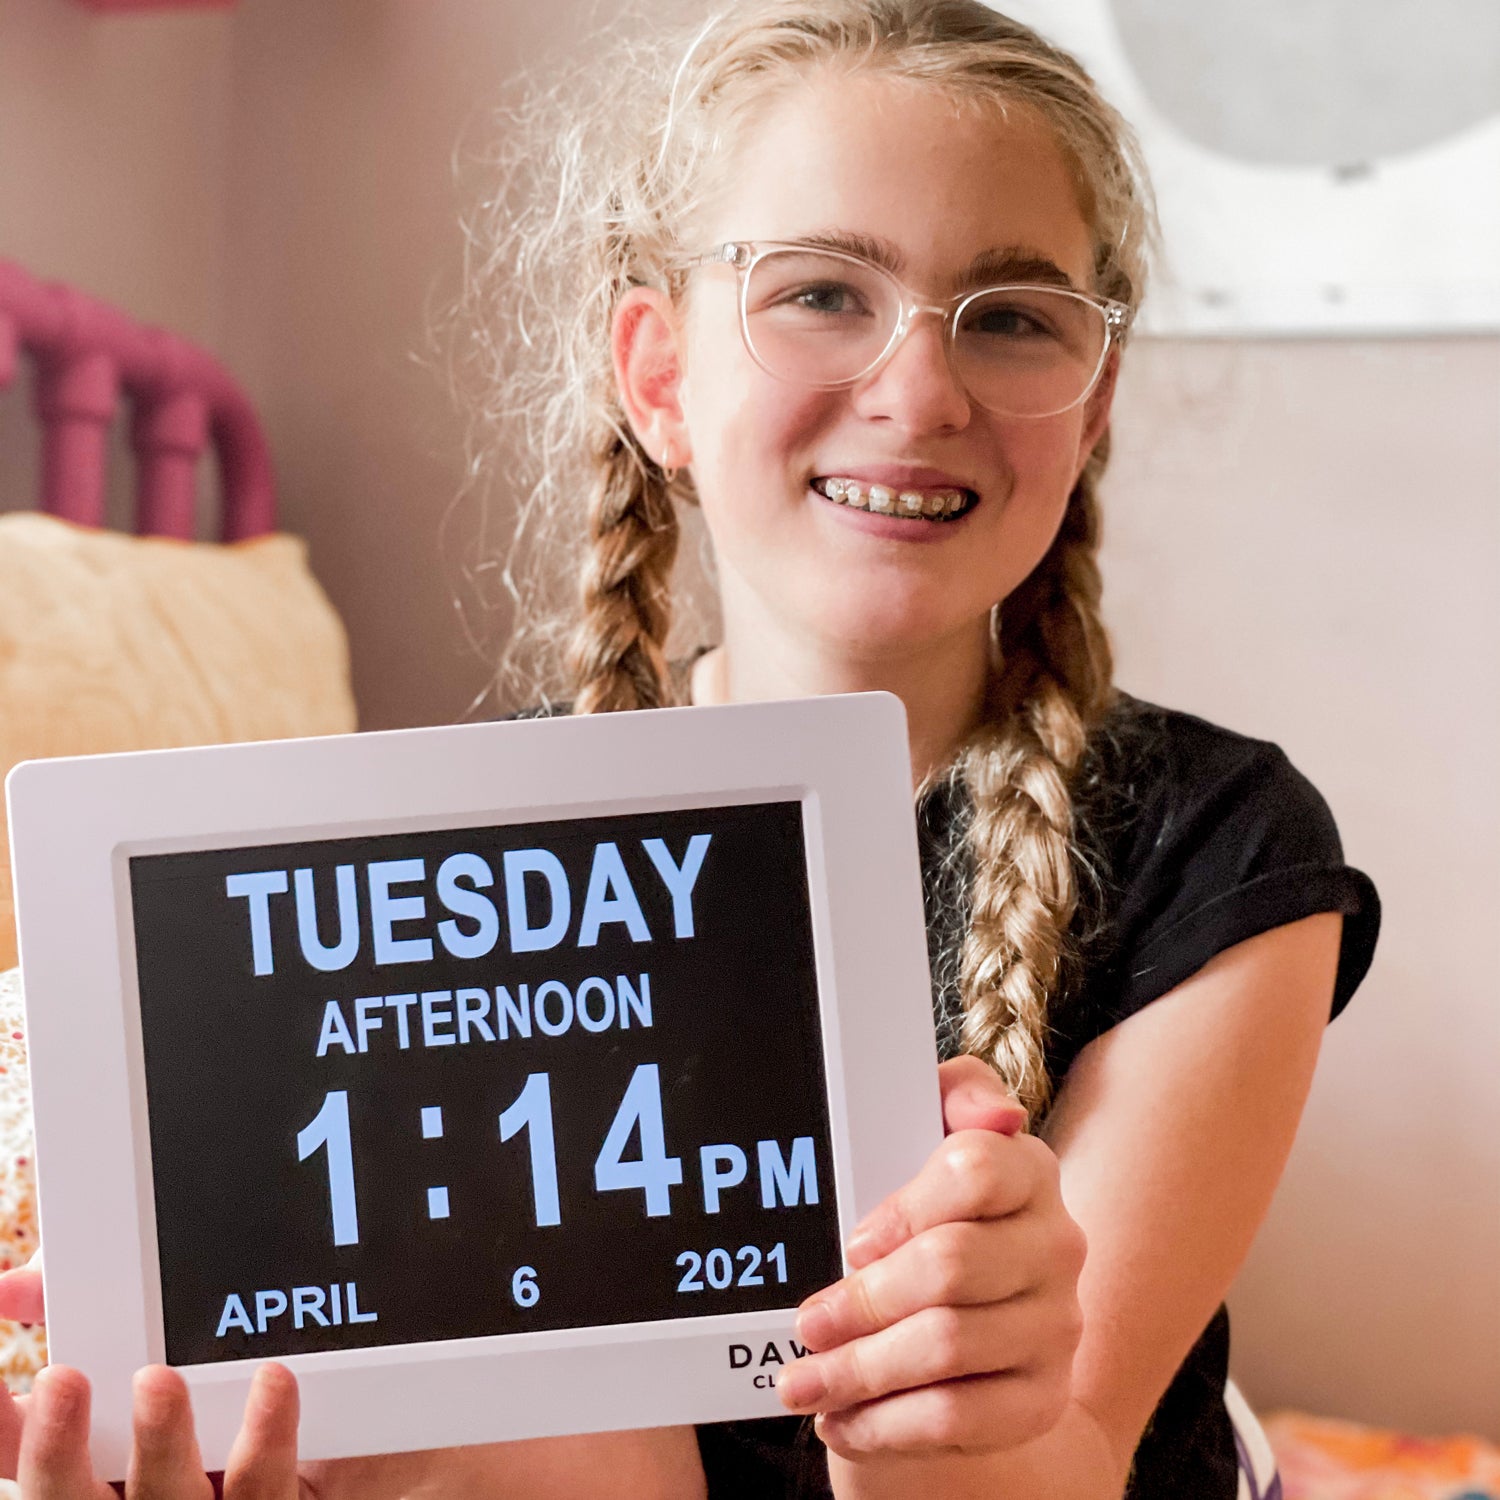 A girl holds a Dawn Clock - Calendar Day Date Time Digital reminder clock. The date says Tuesday afternoon 1:14pm April 6 2021/. The frame is white and the writing is white on a black background. Emily has glasses and plaits. She is wearing a black T-shirt and grey tracksuits pants while sitting on a bed. Emily is very happy holding her Dawn Clock. NDIS Cerebral Palsy ADD ADHD Autism ASD Neurodiversity Brain Injury Memory Loss Dementia Alzheimer's Disease Disability Alarm Gift Plan Manager Plan Managed.